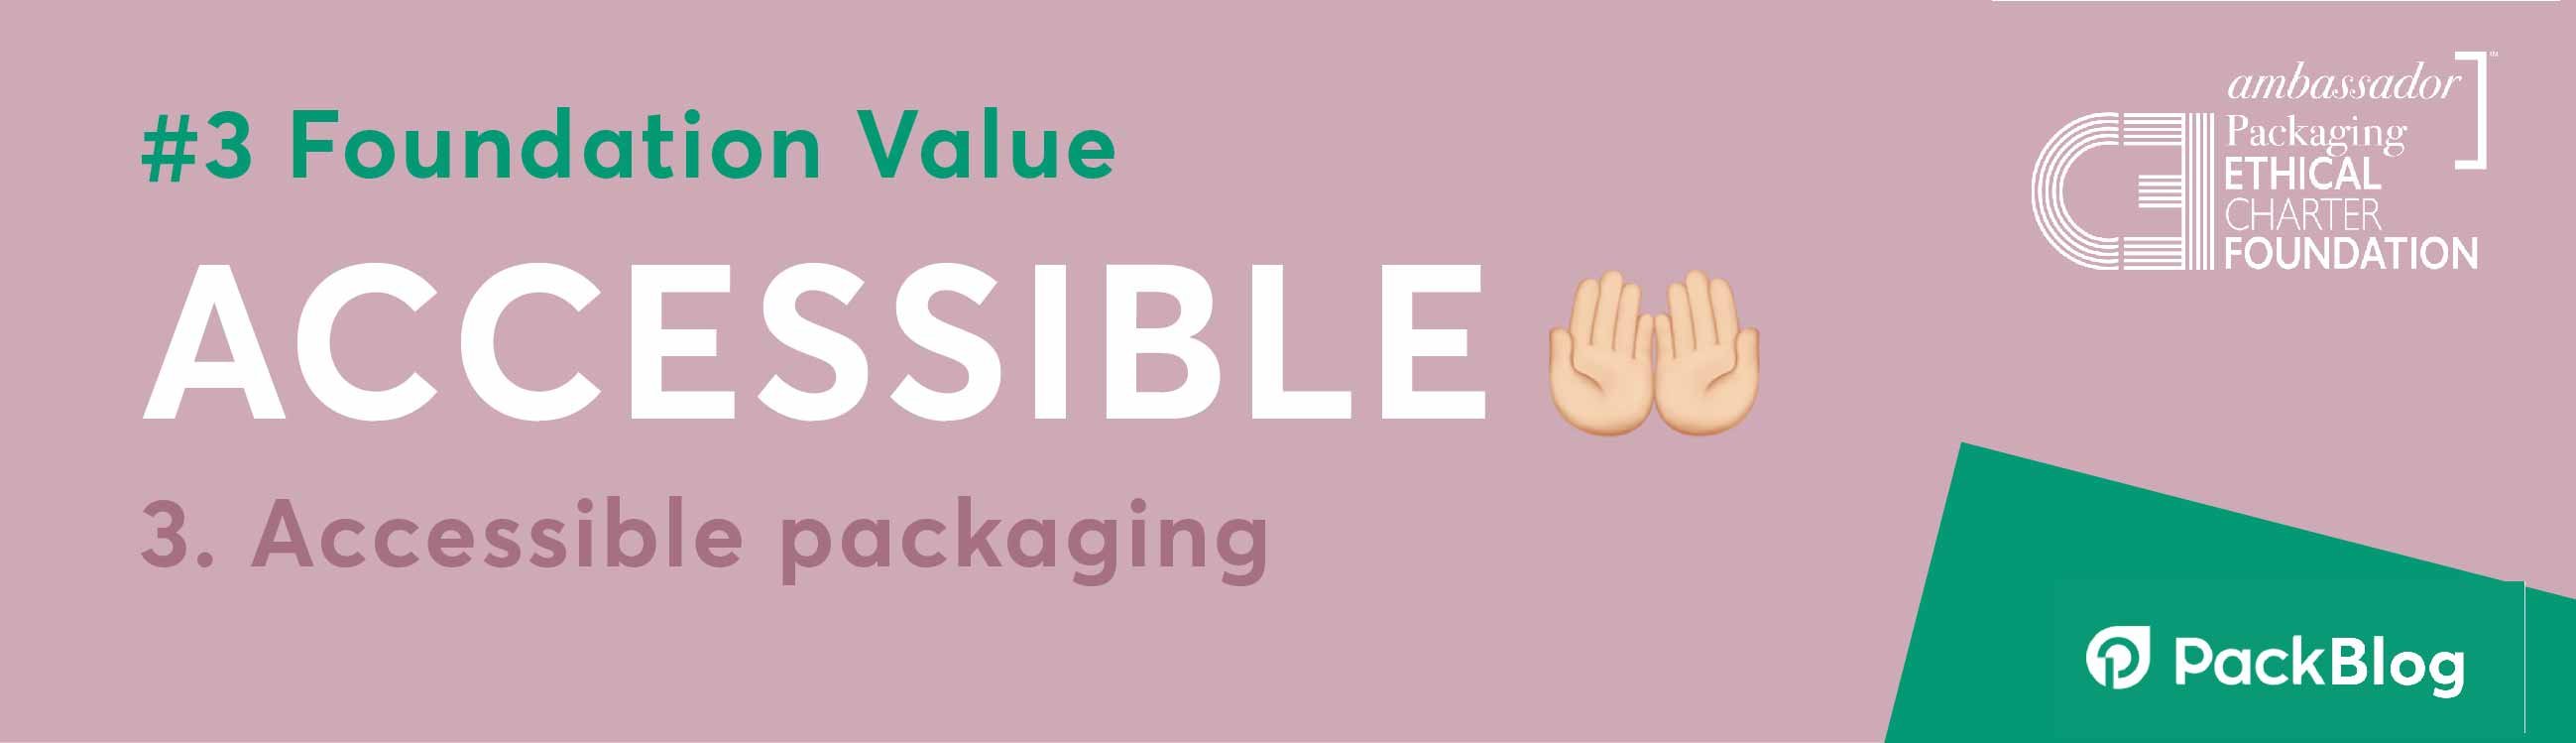 Accessible packaging